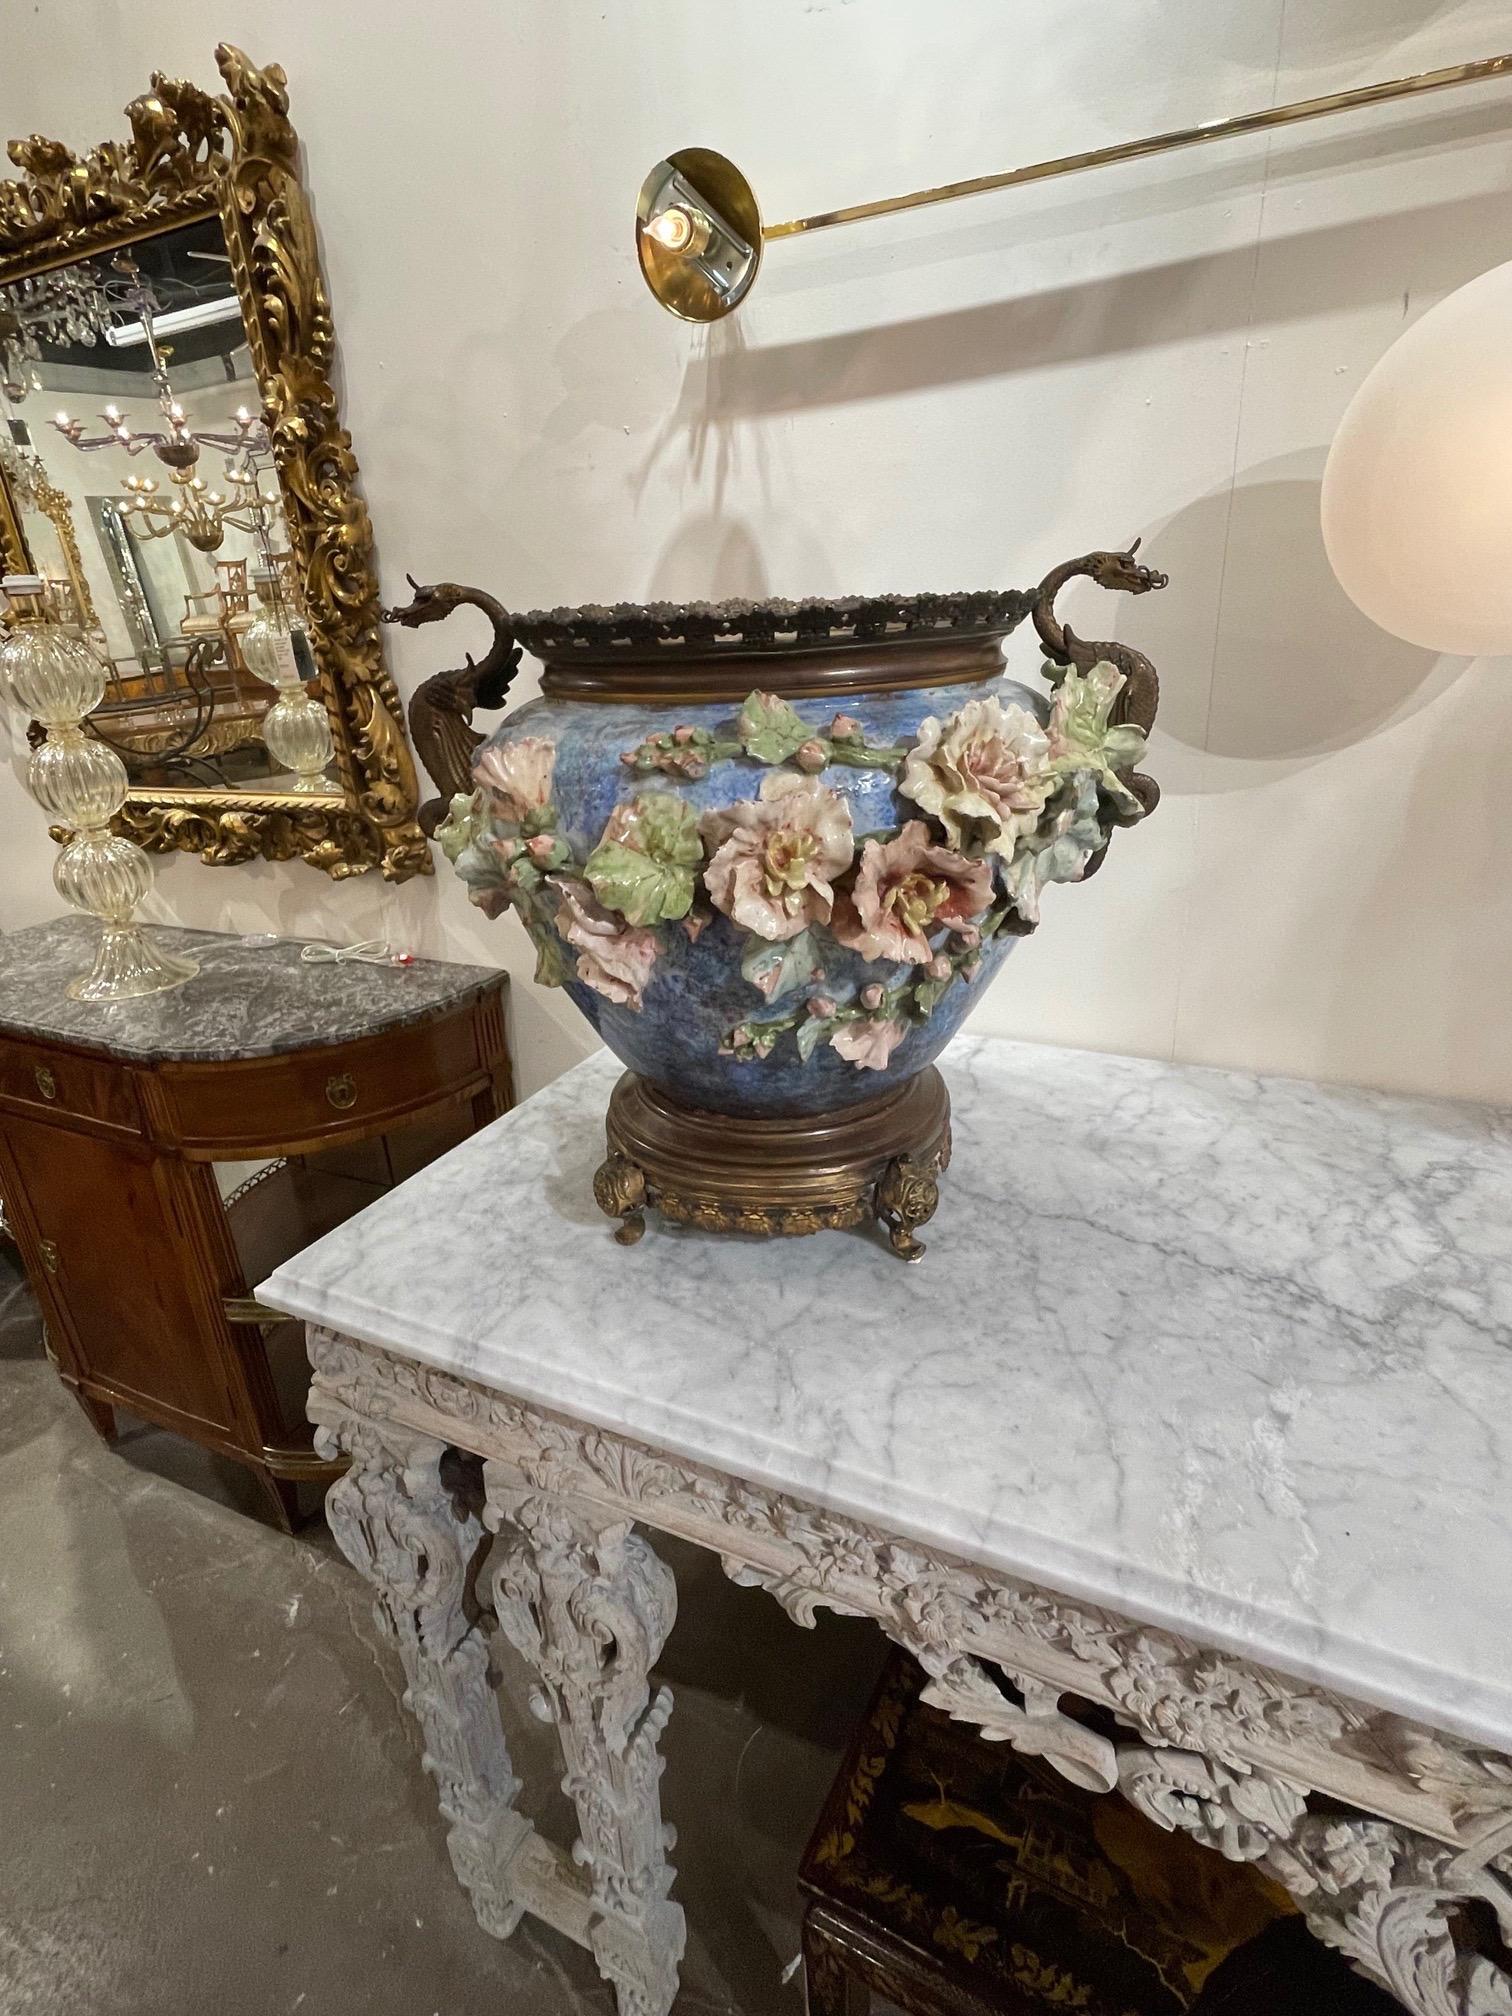 Exceptional 19th century French large scale Barbotine Majolica Jardinere on bronze feet. Beautiful pink flowers on a blue vase. Also note the bronze handles that are in the shape of dragons. Very fine quality. So pretty and a true work of art!!